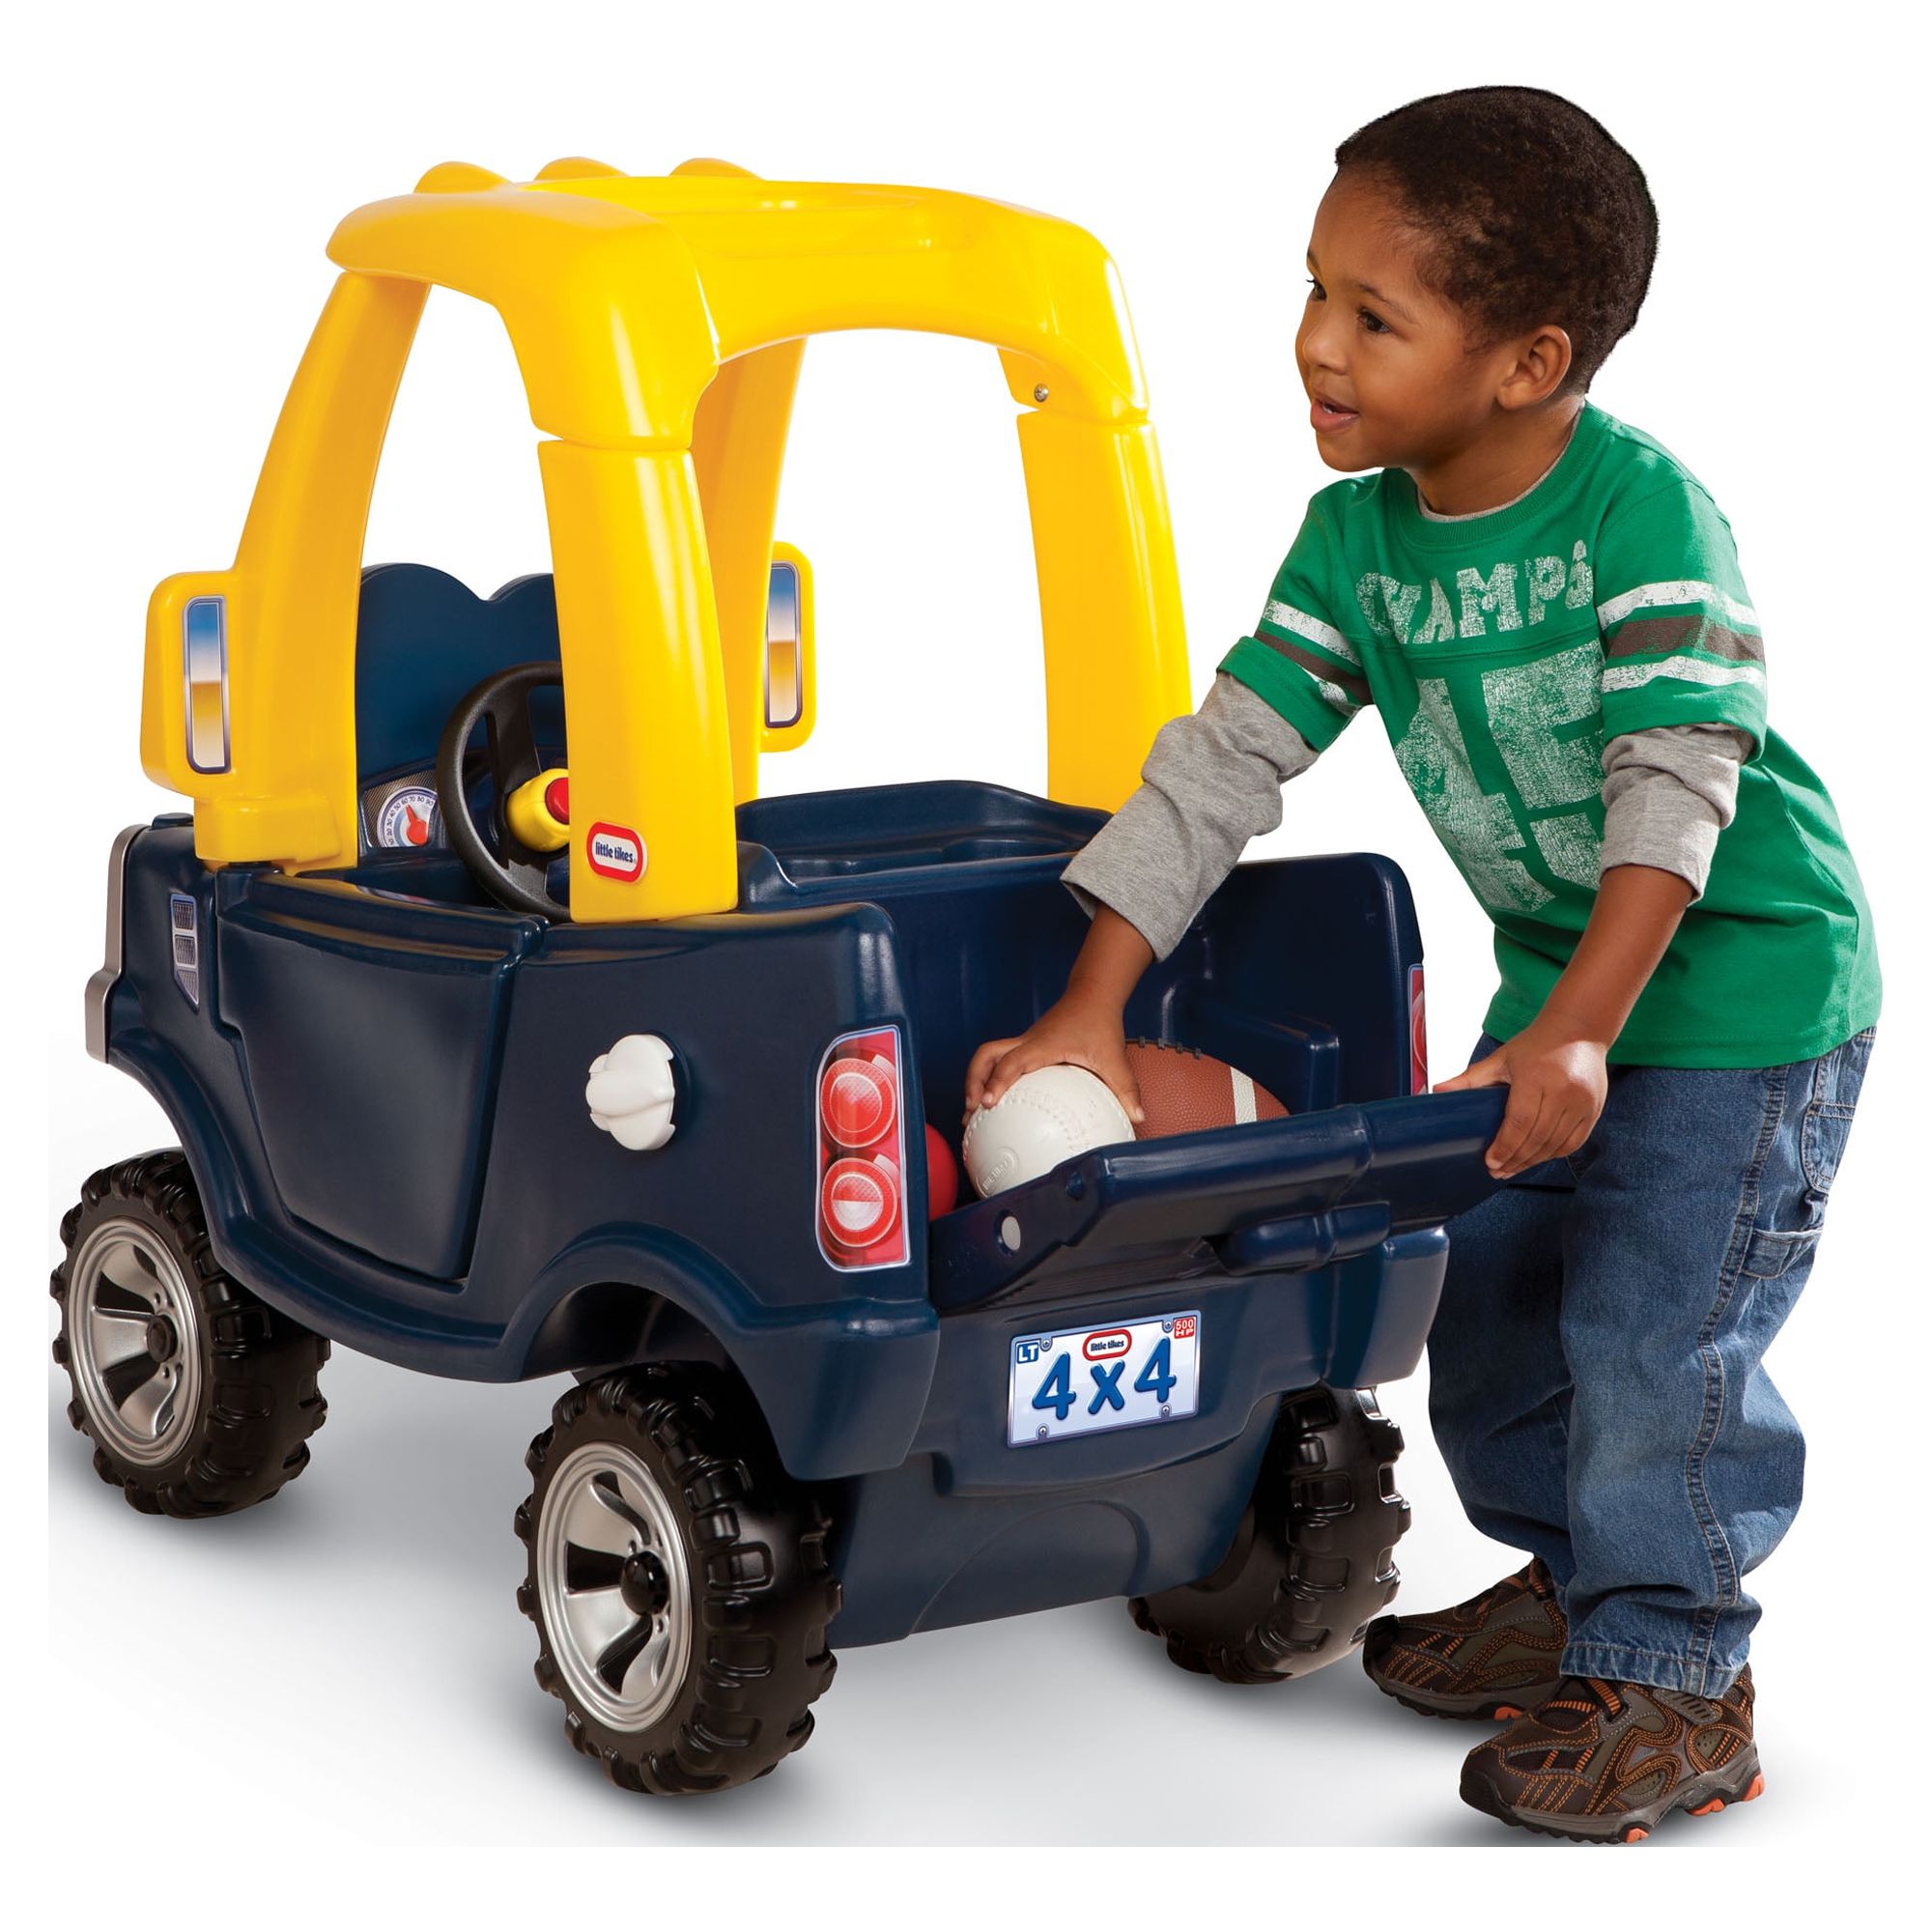 Little Tikes Cozy Truck Ride-on with Removable Floorboard, 18 Months to 5 Years - image 5 of 9